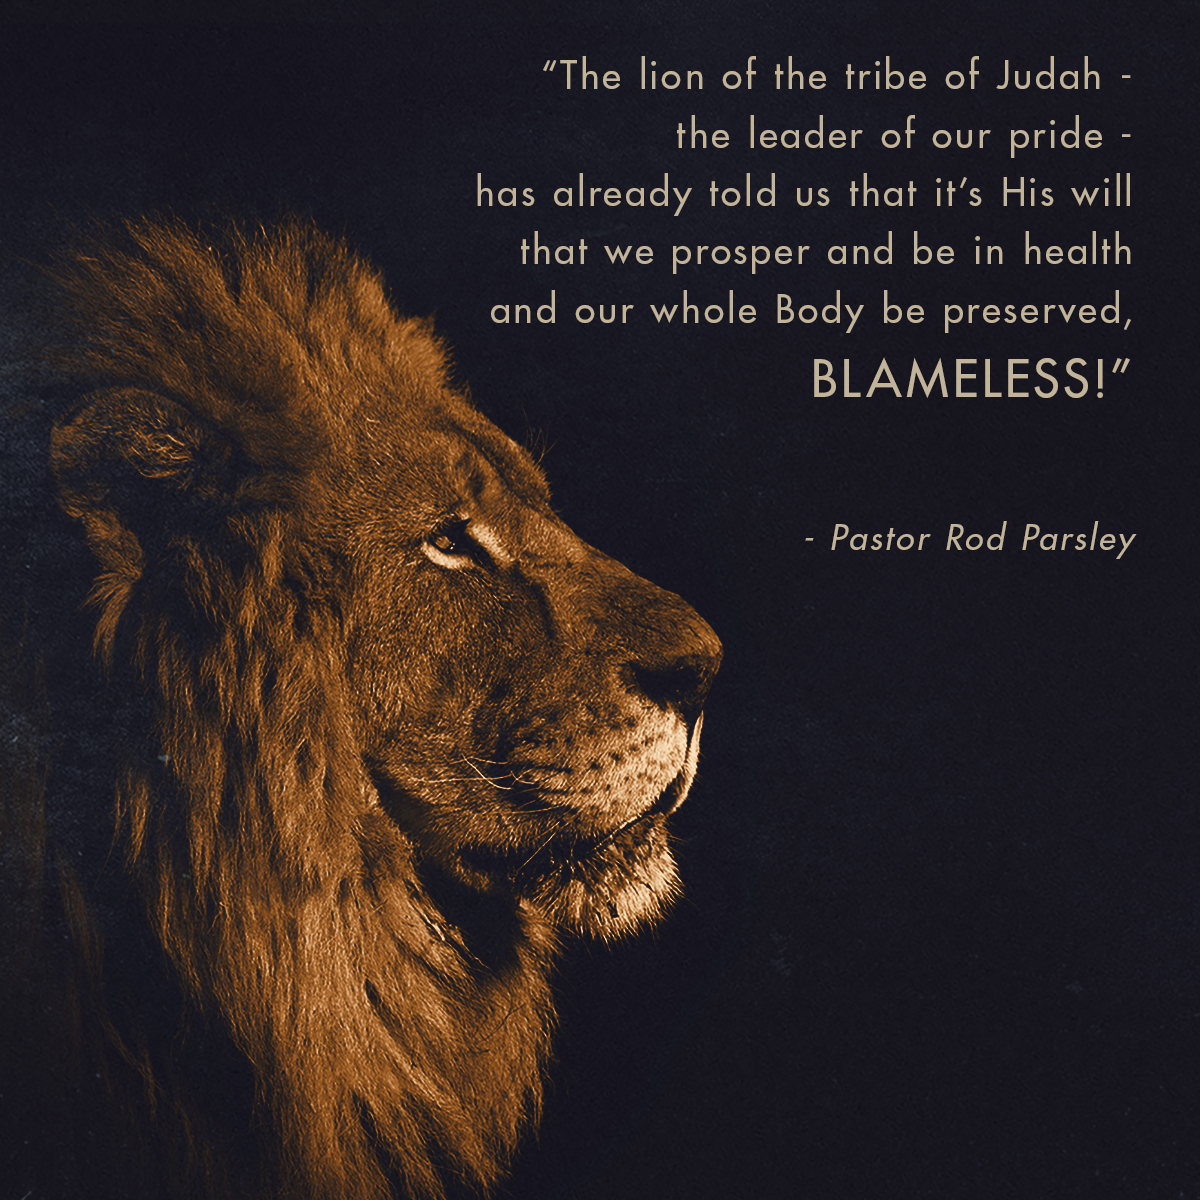 “The lion of the tribe of Judah – the leader of our pride – has already told us that it’s His will that we prosper and be in health and our whole Body be preserved, blameless!” – Pastor Rod Parsley